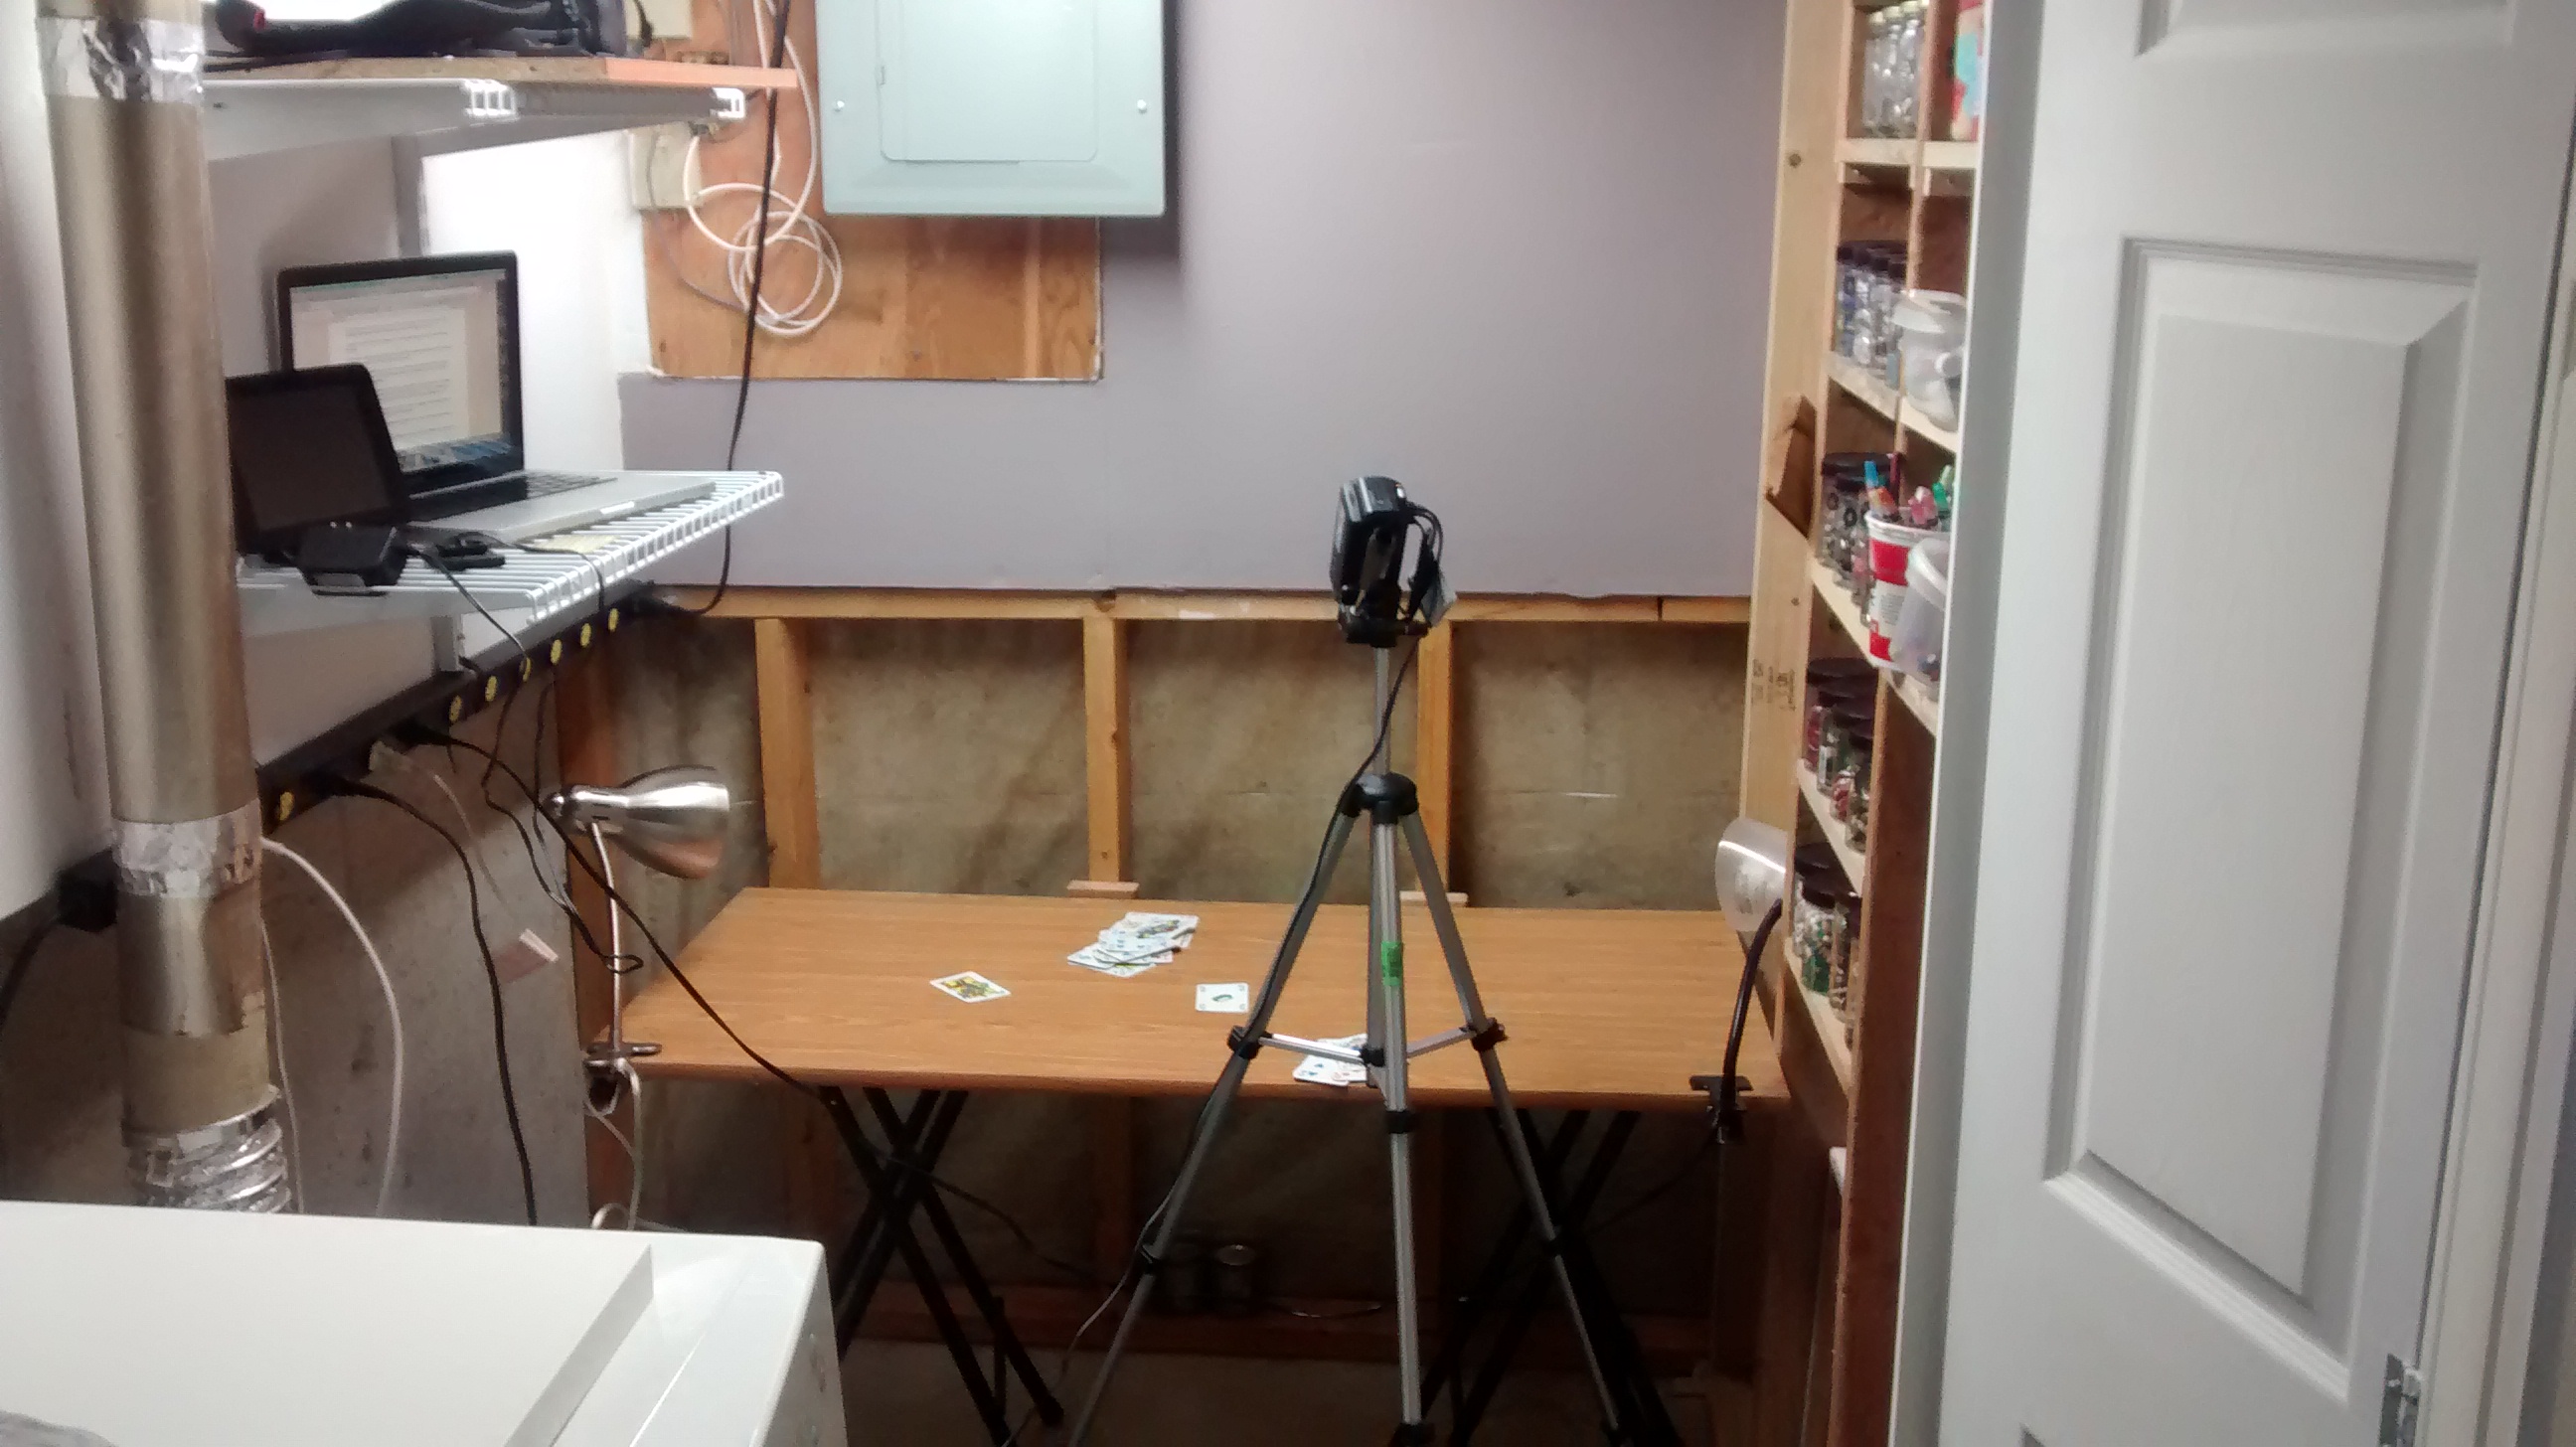 view of one of the many Board Simple filming locations, in my basement.